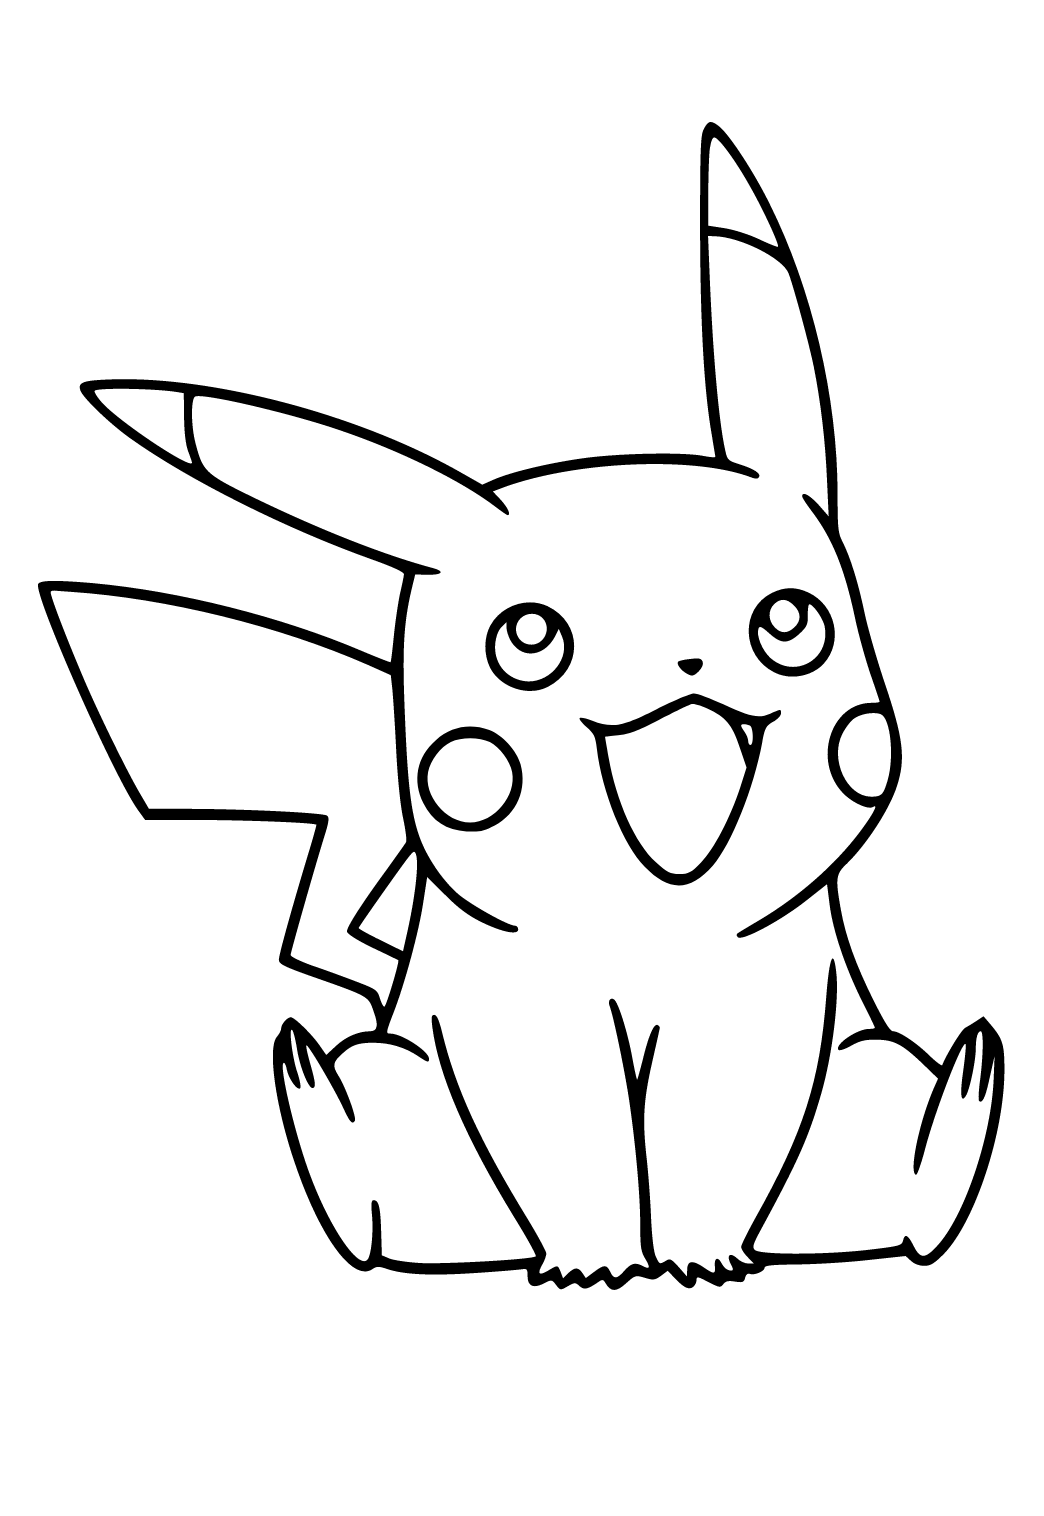 Free printable pikachu easy coloring page for adults and kids